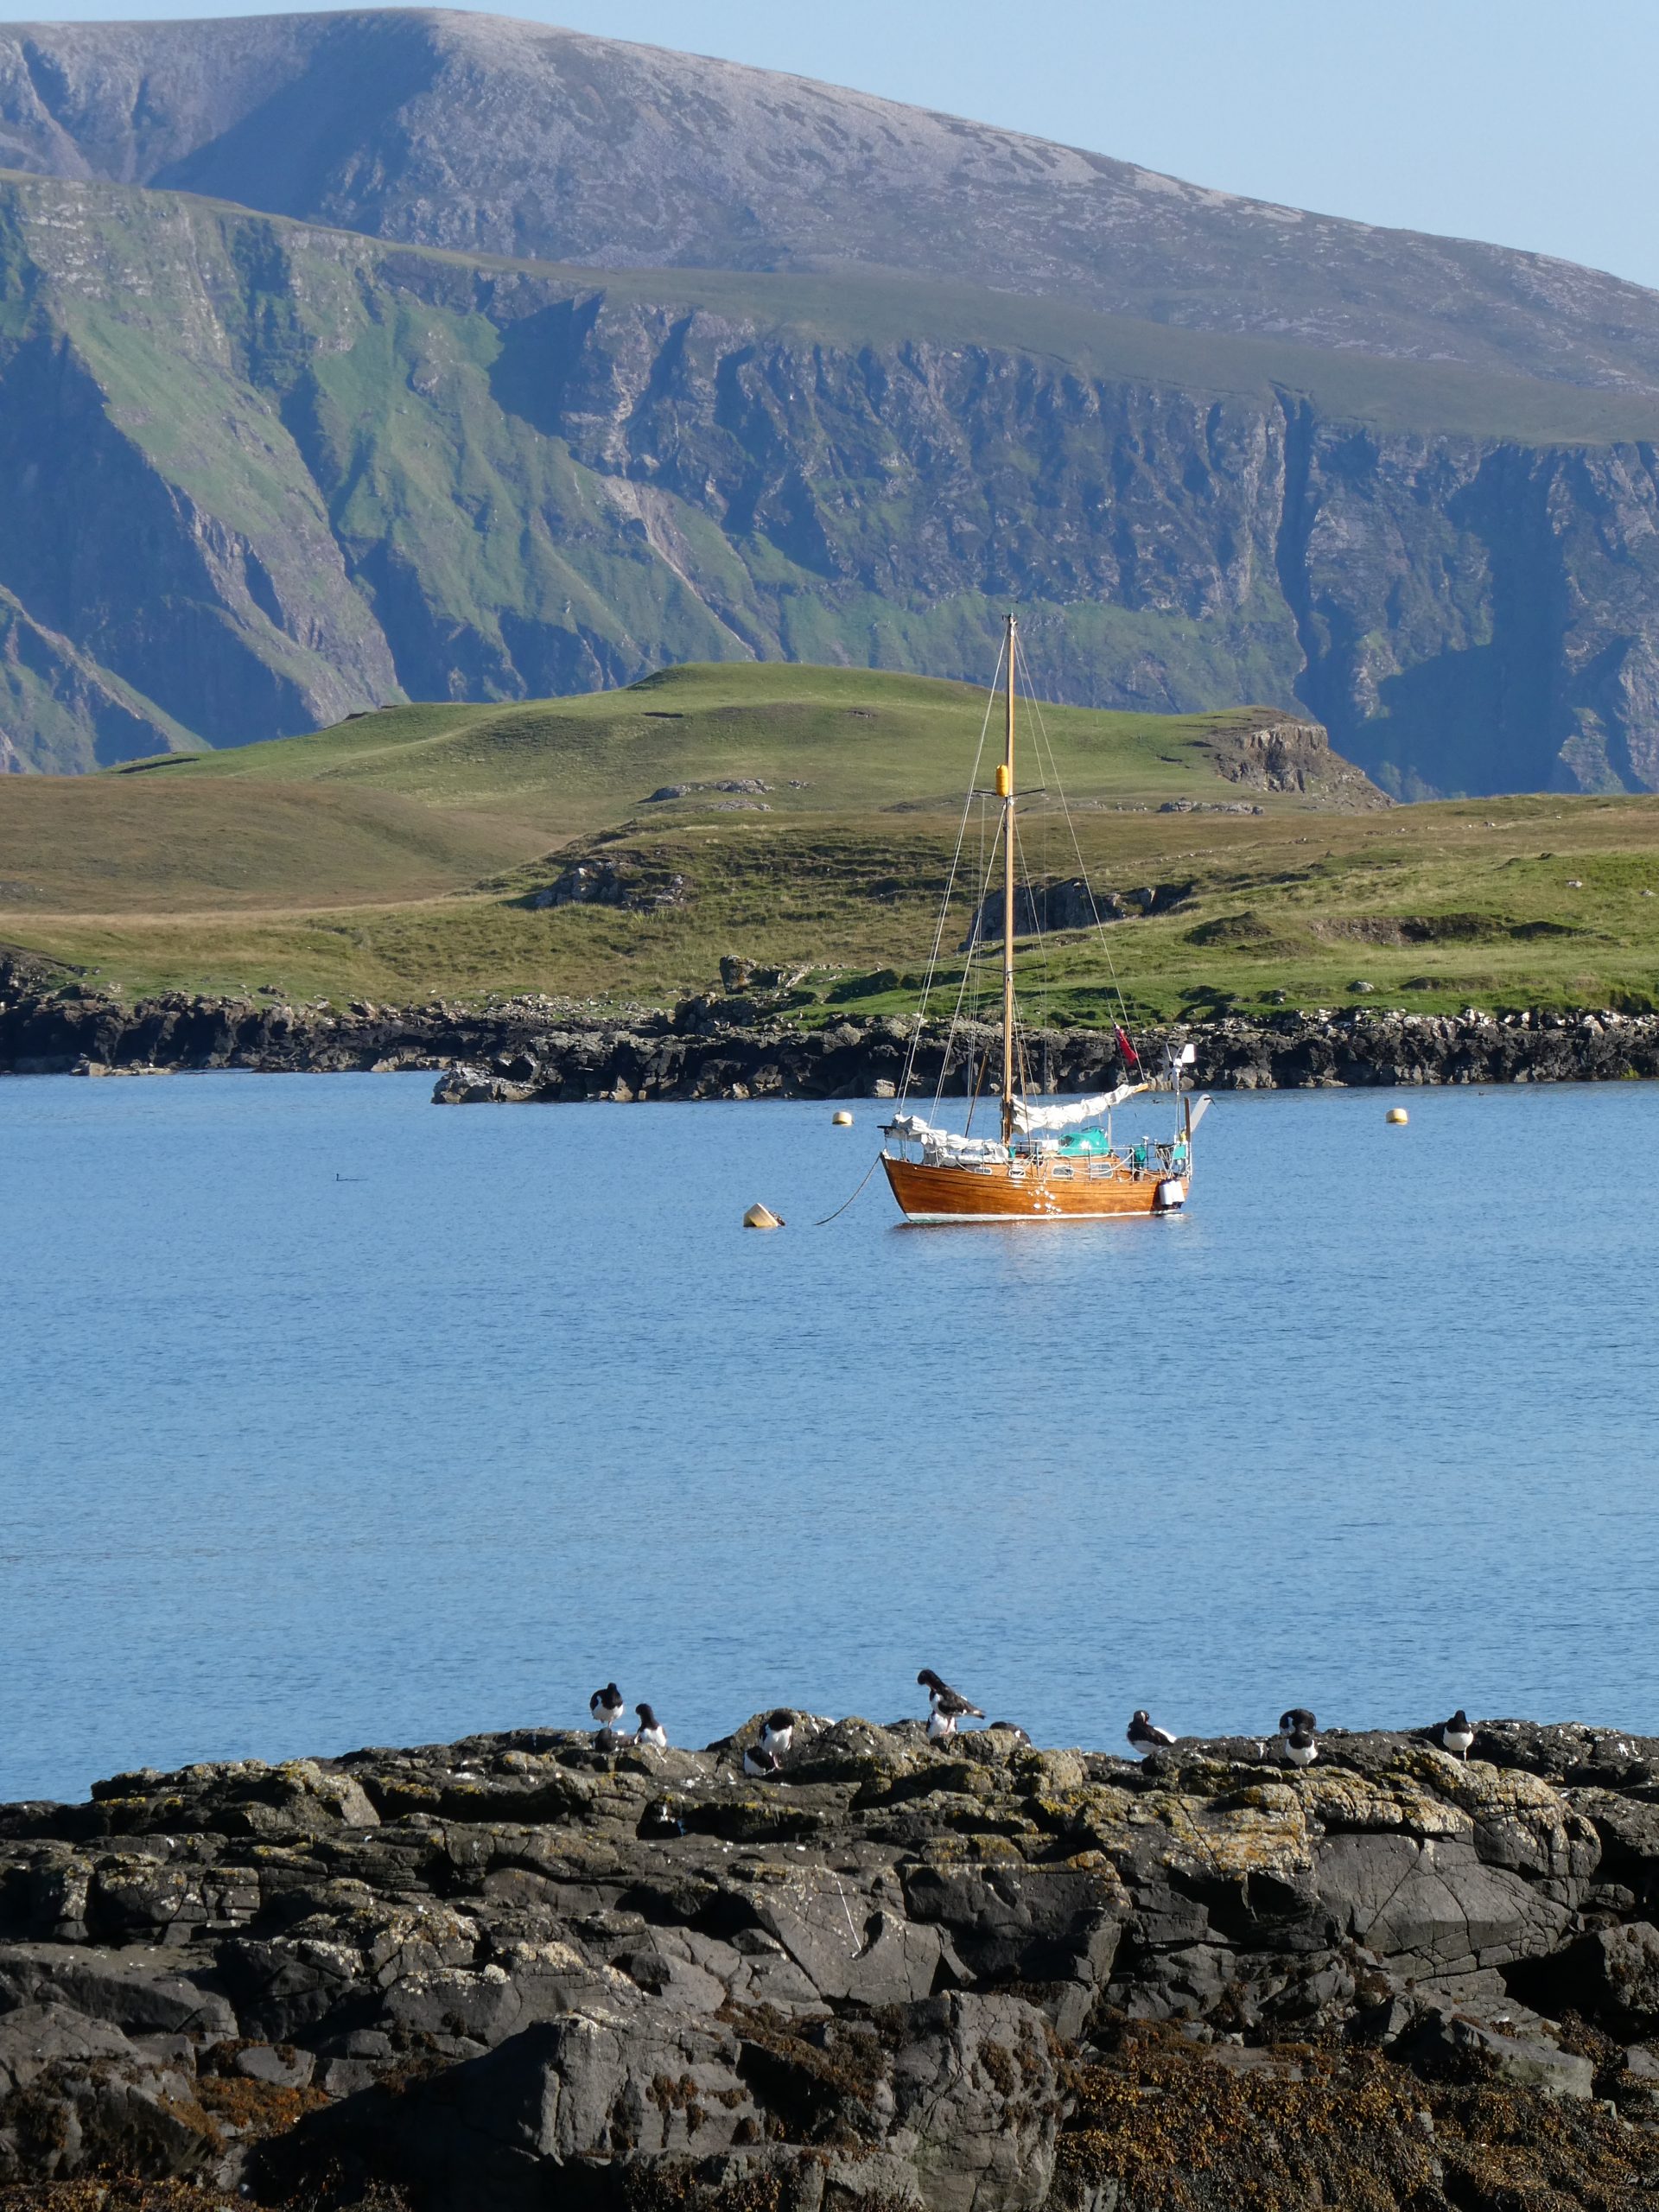 A little sail to the beautiful Isle of Canna